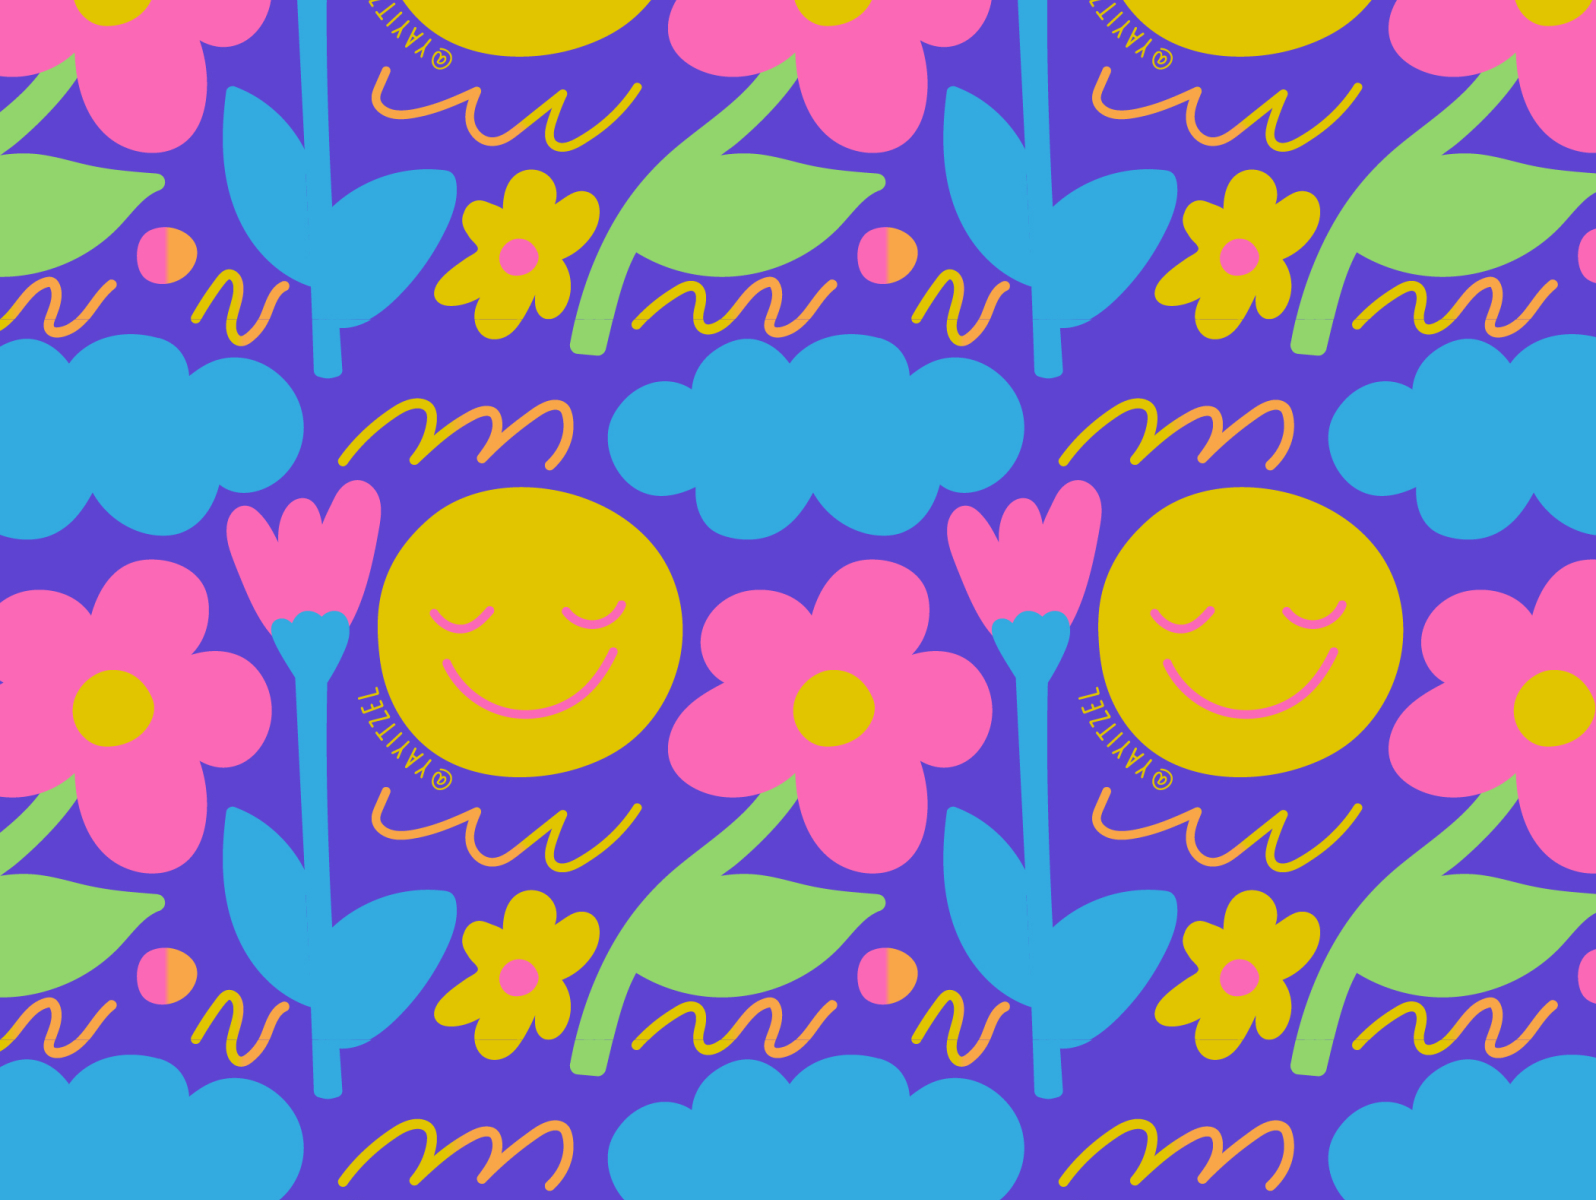 Smiley Flower Fabric Wallpaper and Home Decor  Spoonflower